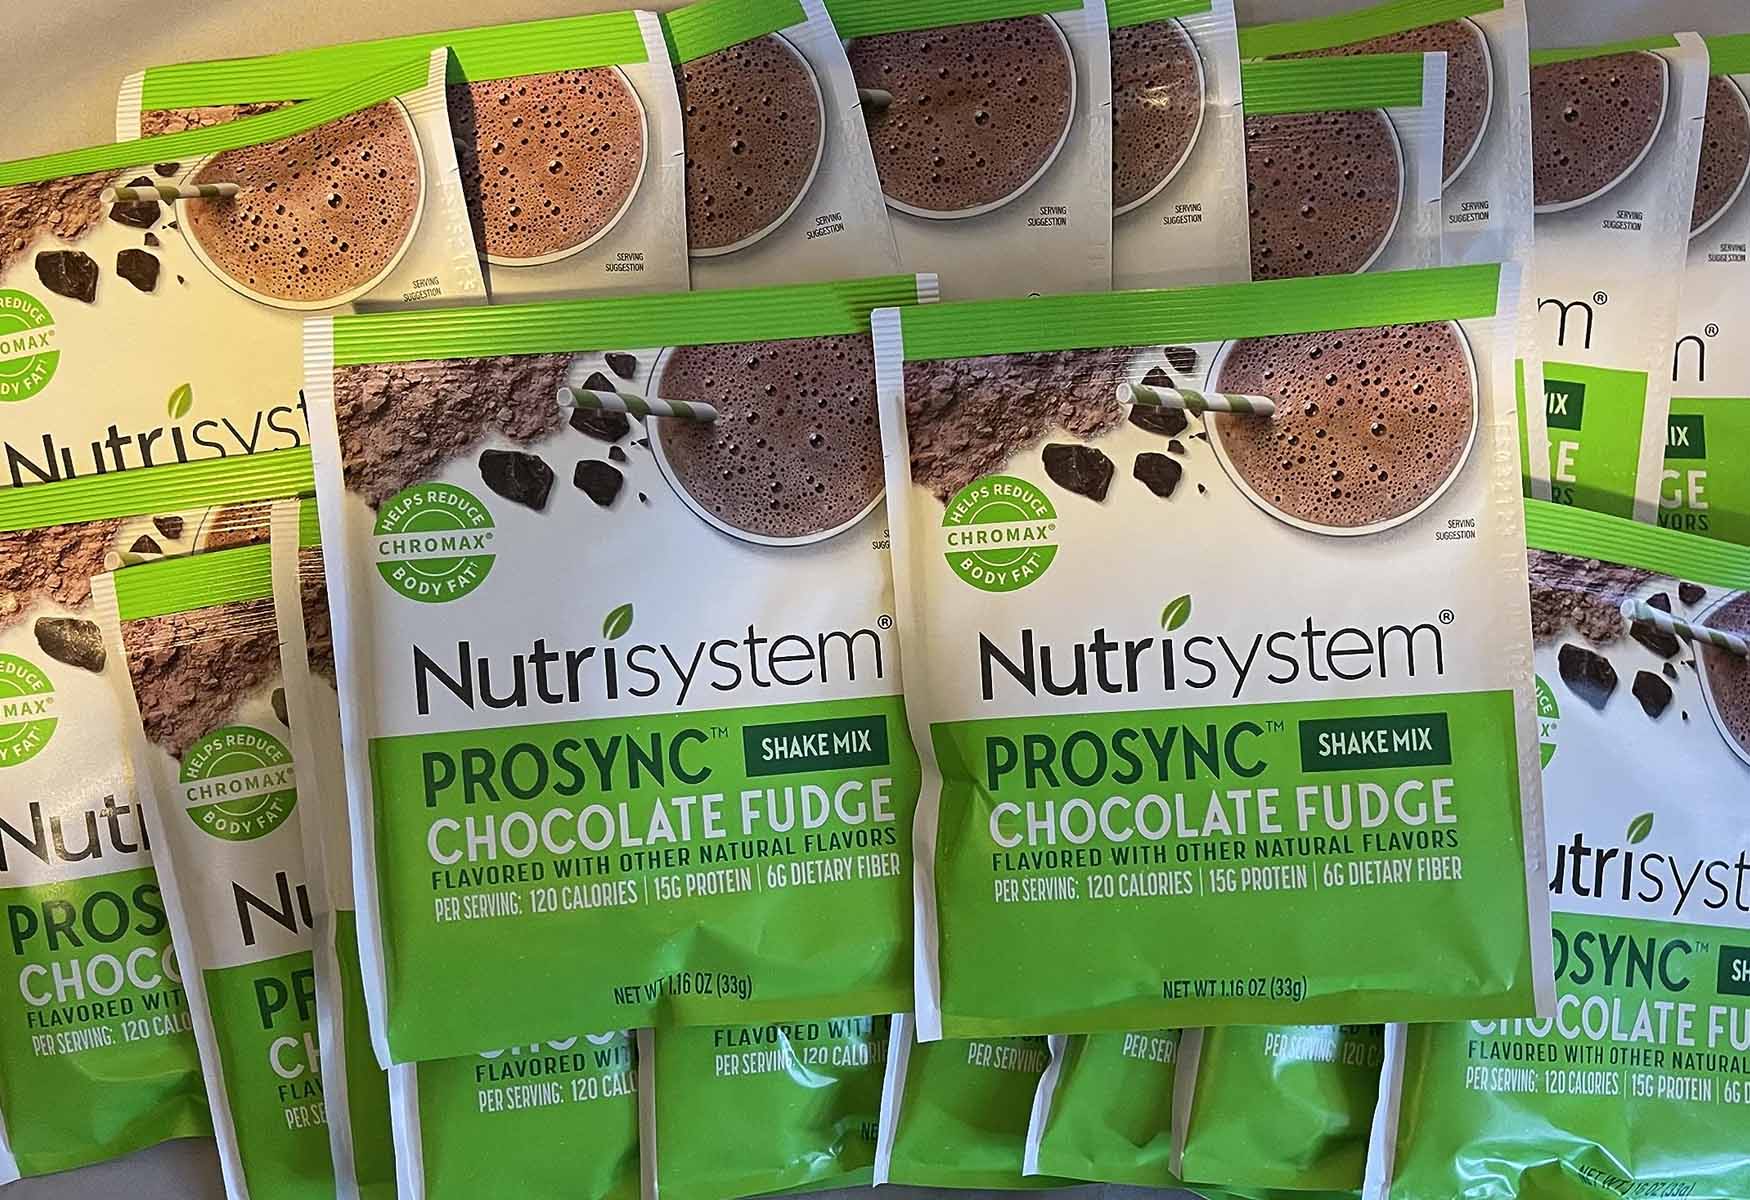 18 Nutrisystem Shake Nutrition Facts - Facts.net